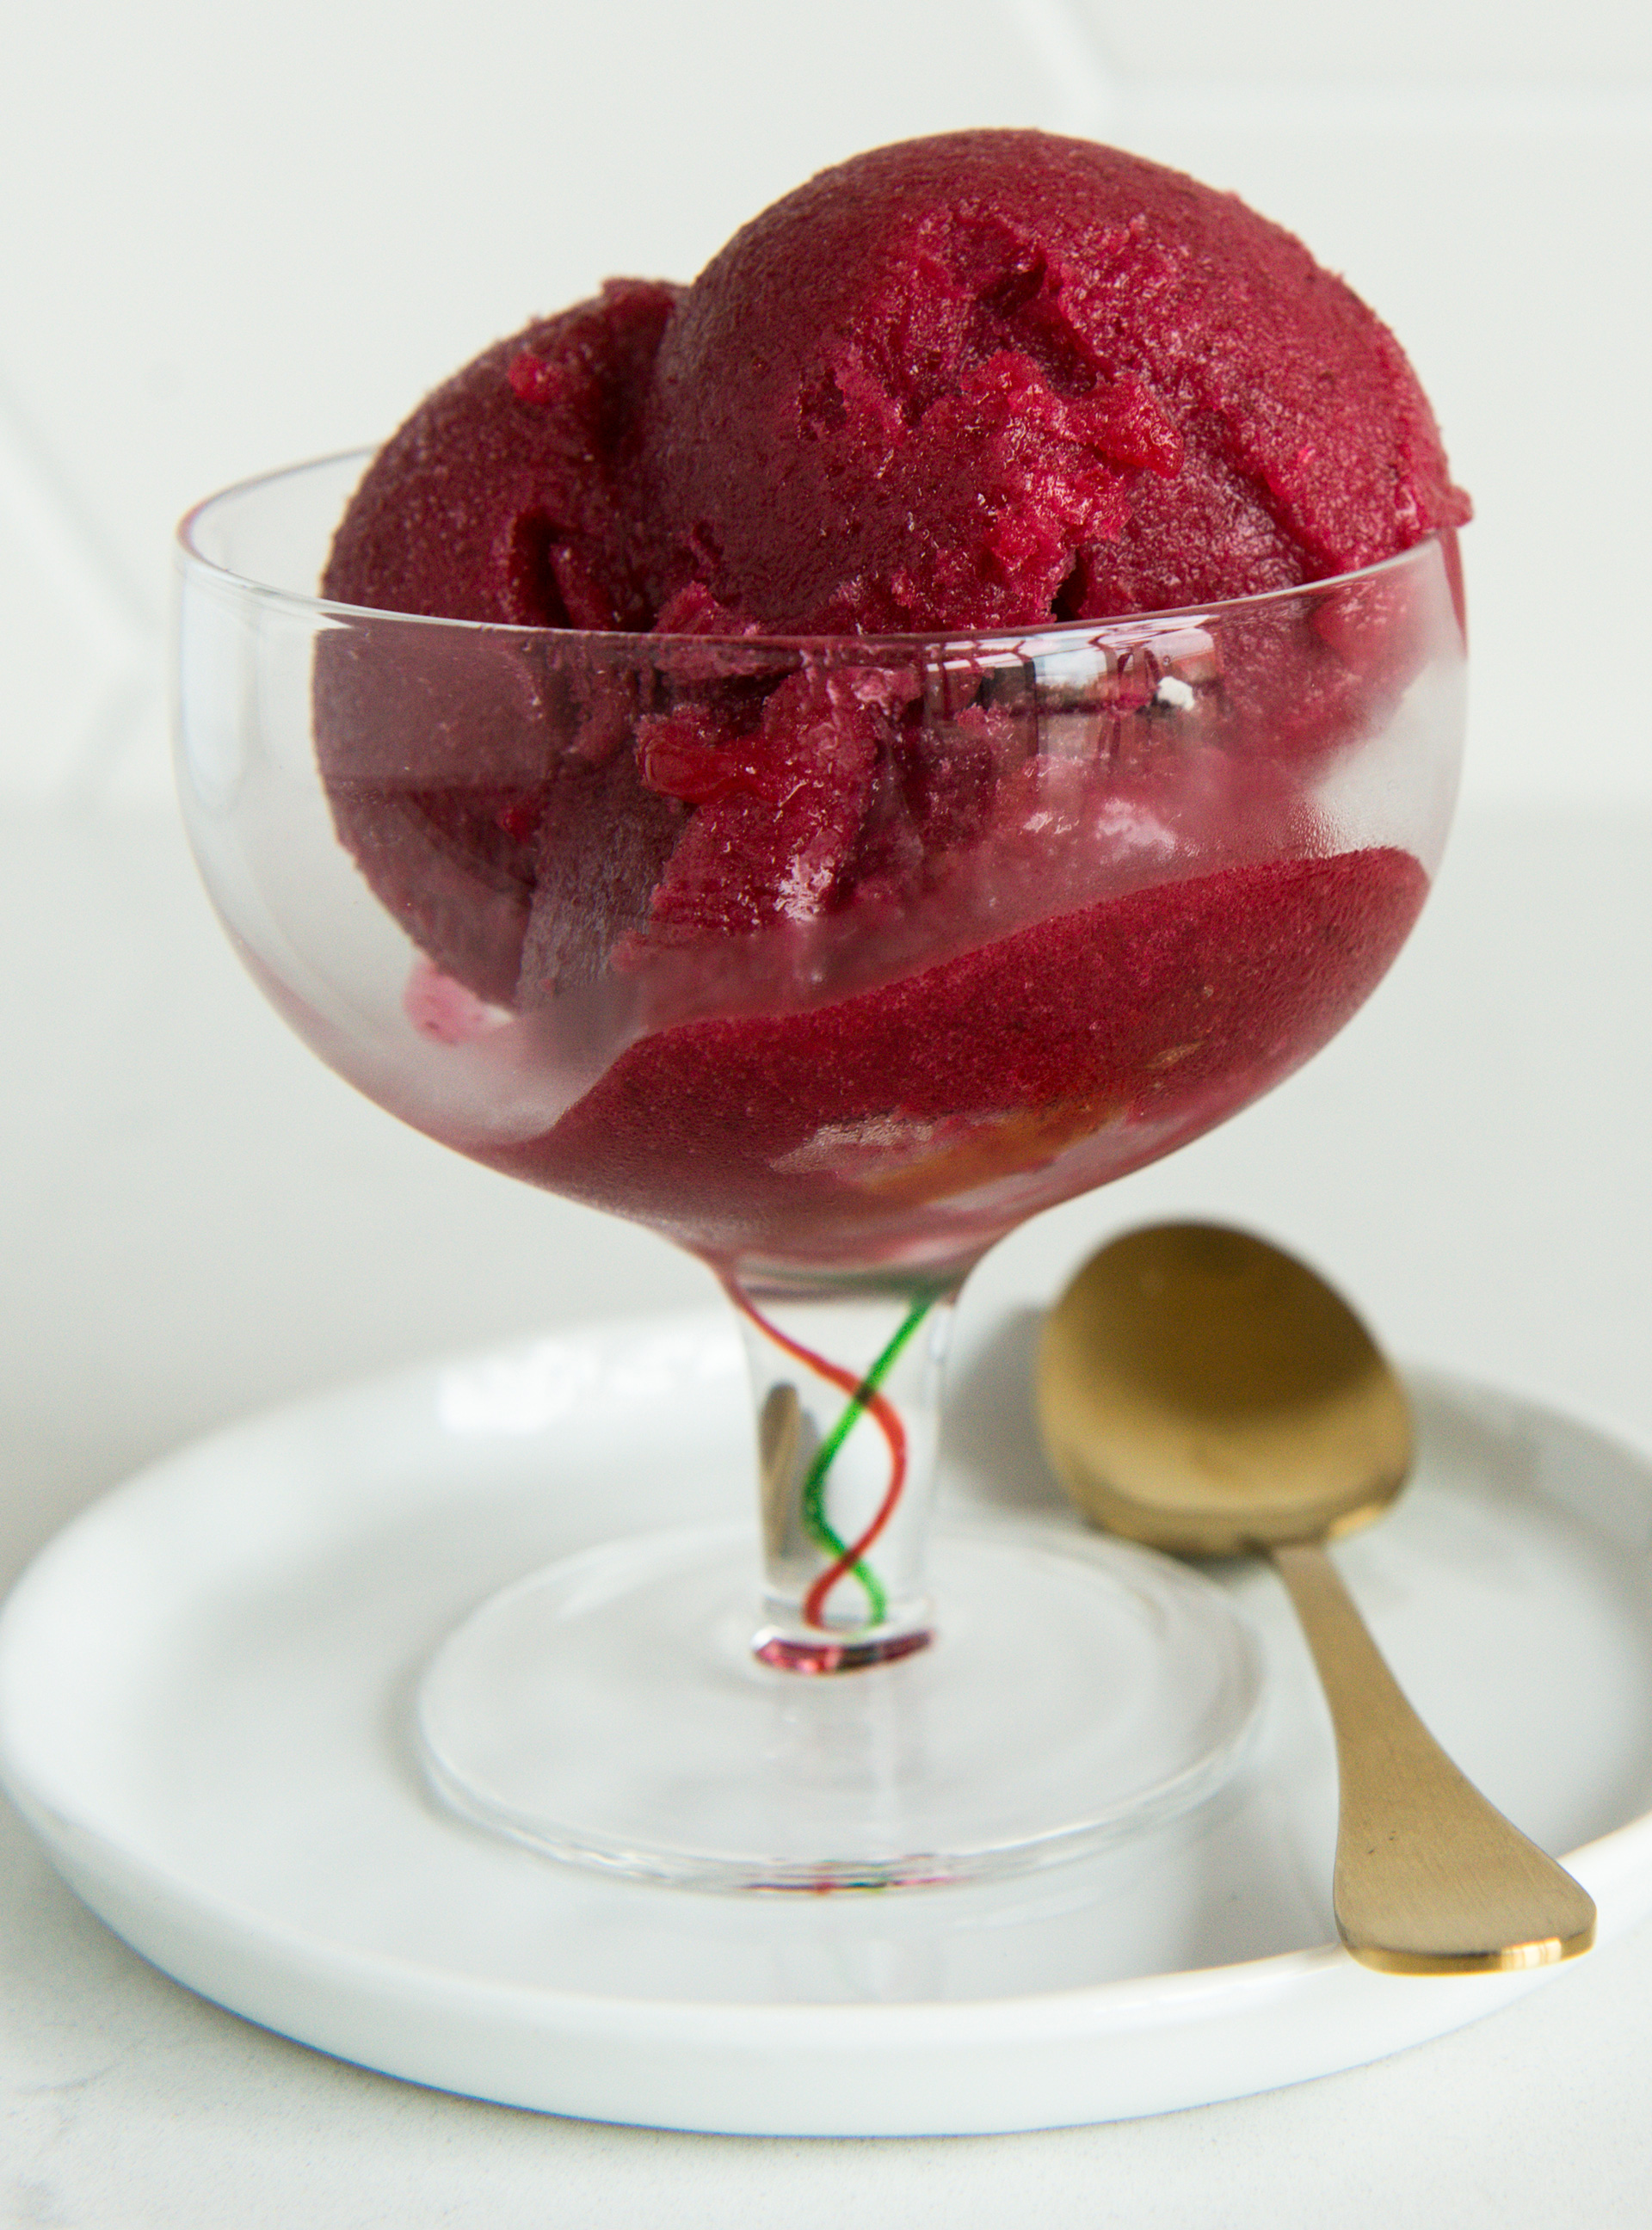 Sorbet aux canneberges